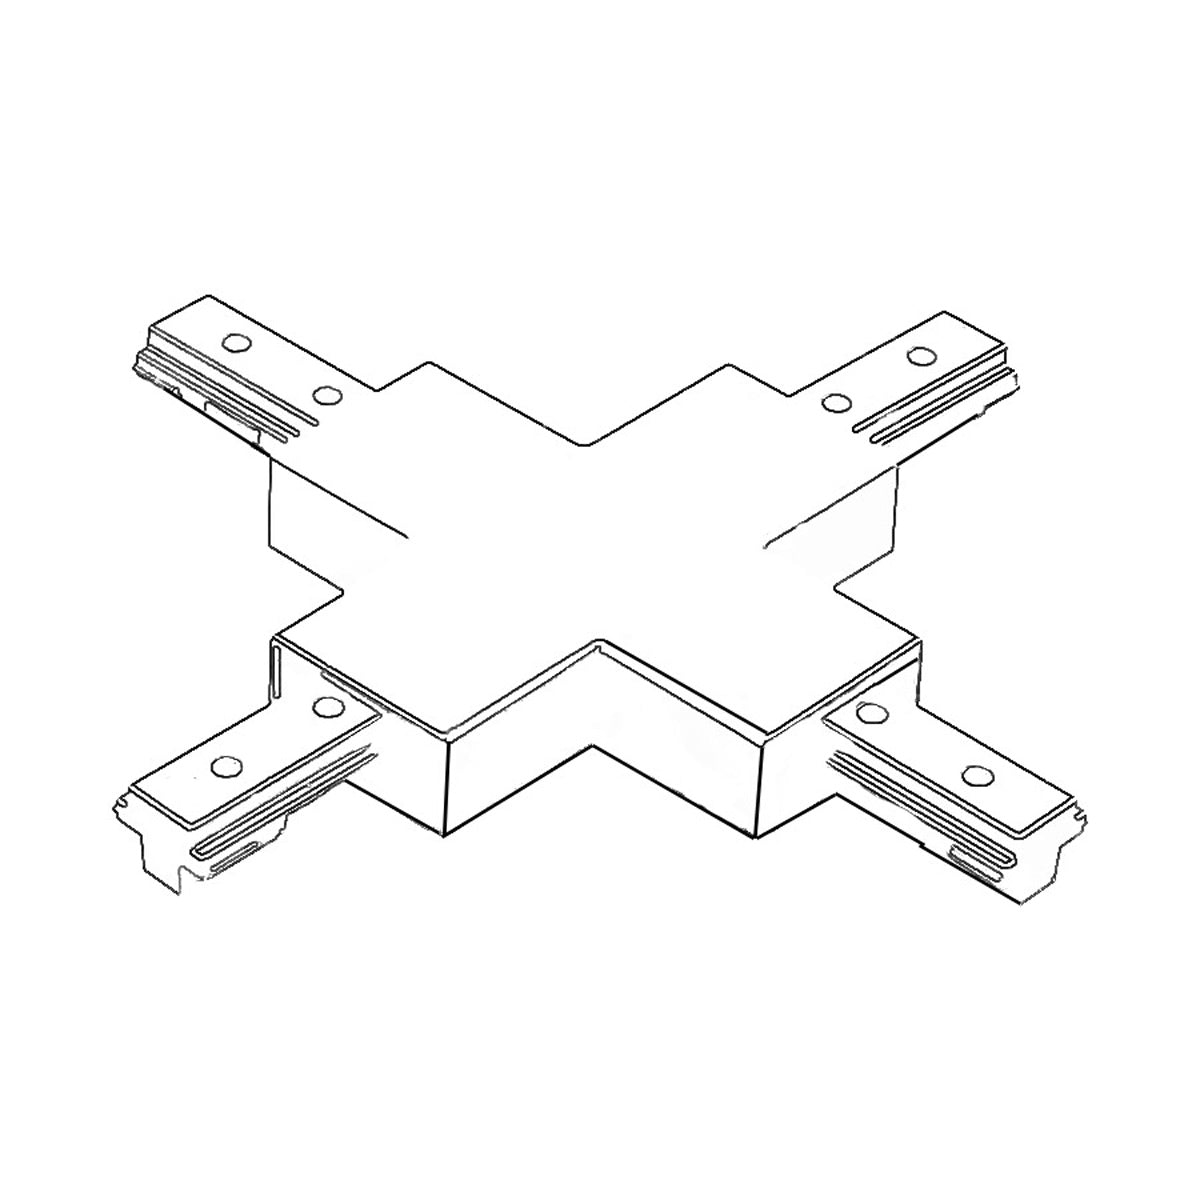 H Track "X" Connector